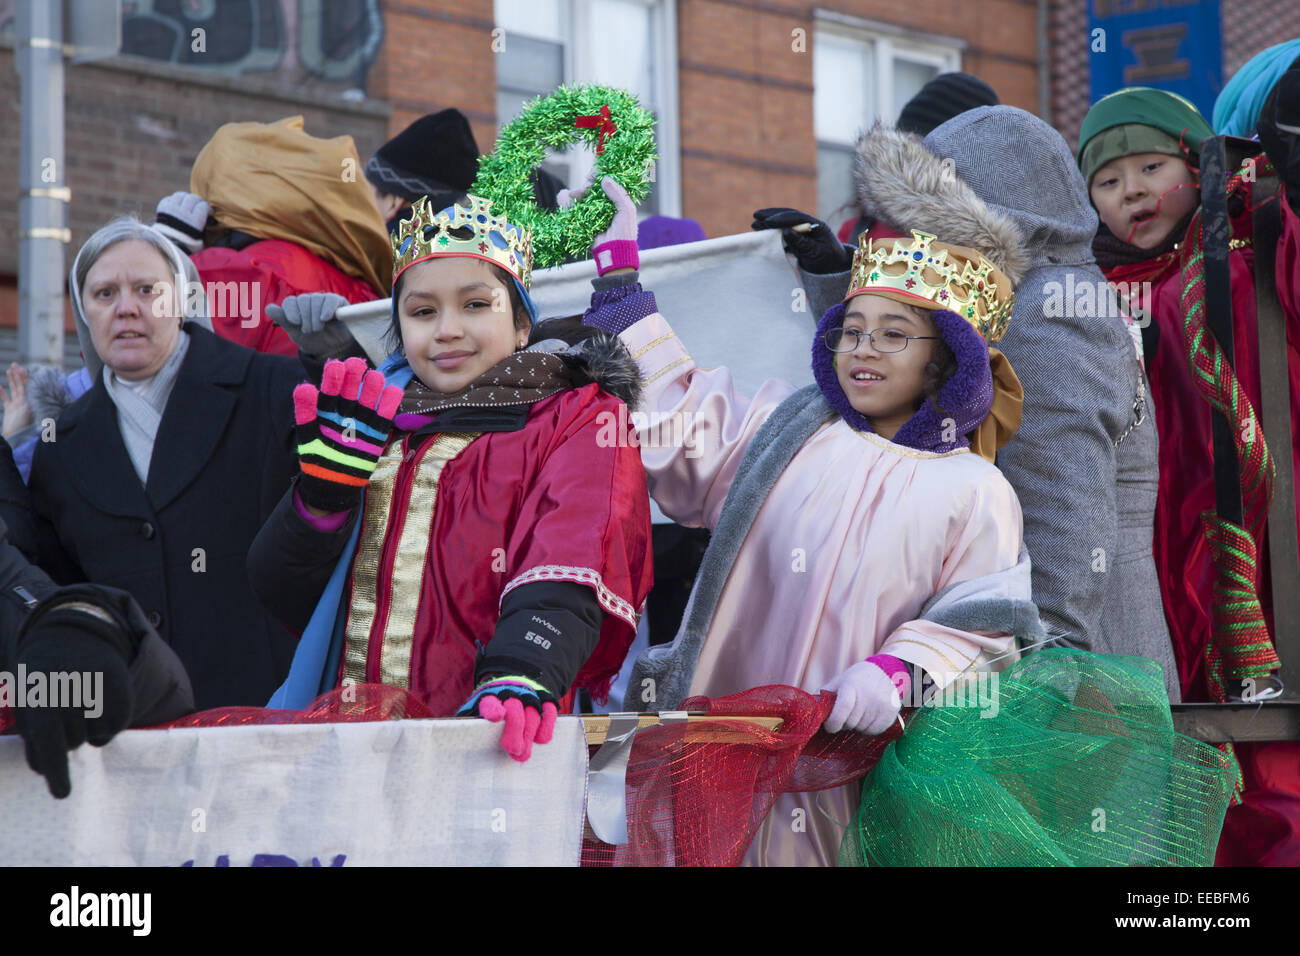 Participants in the annualThree Kings Day Parade on Epiphany in Williamsburg, Brooklyn, NY Stock Photo